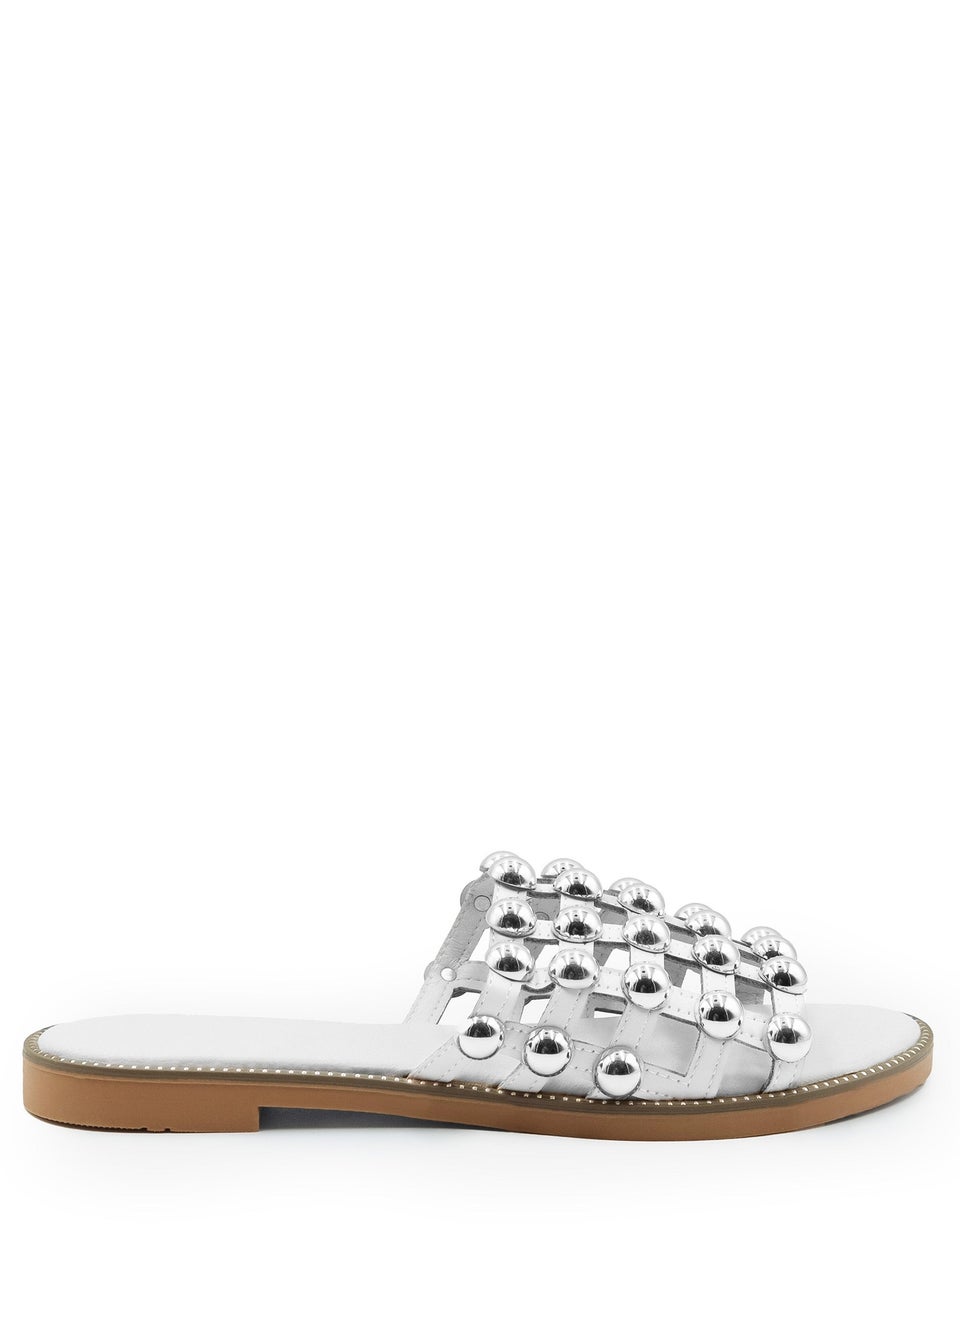 Where's That From White Pu Kelly Sliders With Studded Detailing